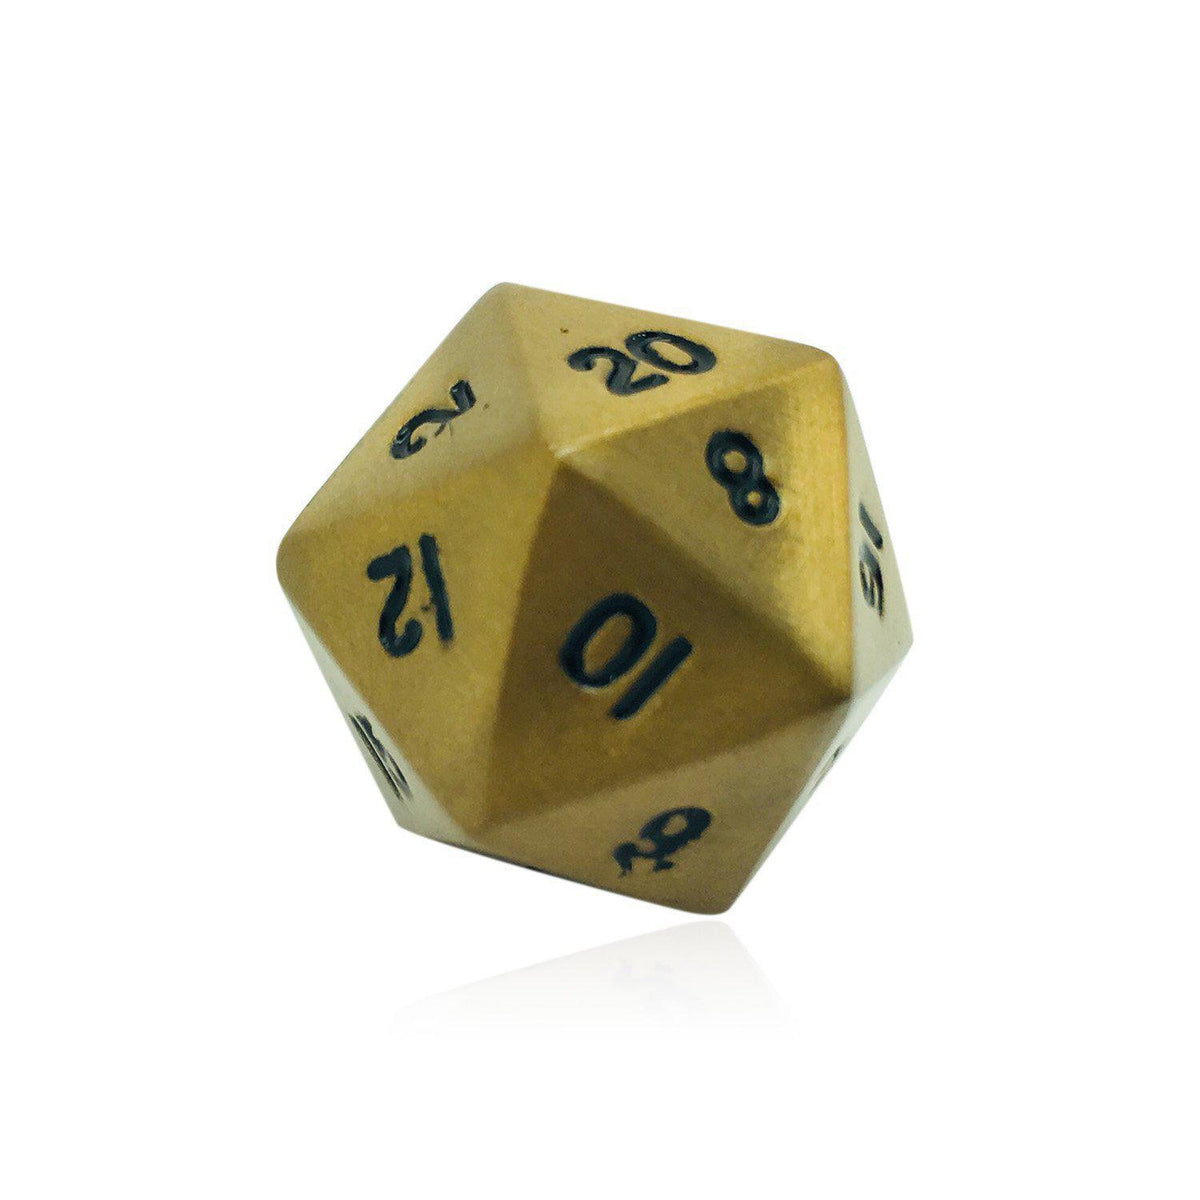 Single Alloy D4 in Dead Man's Gold by Norse Foundry